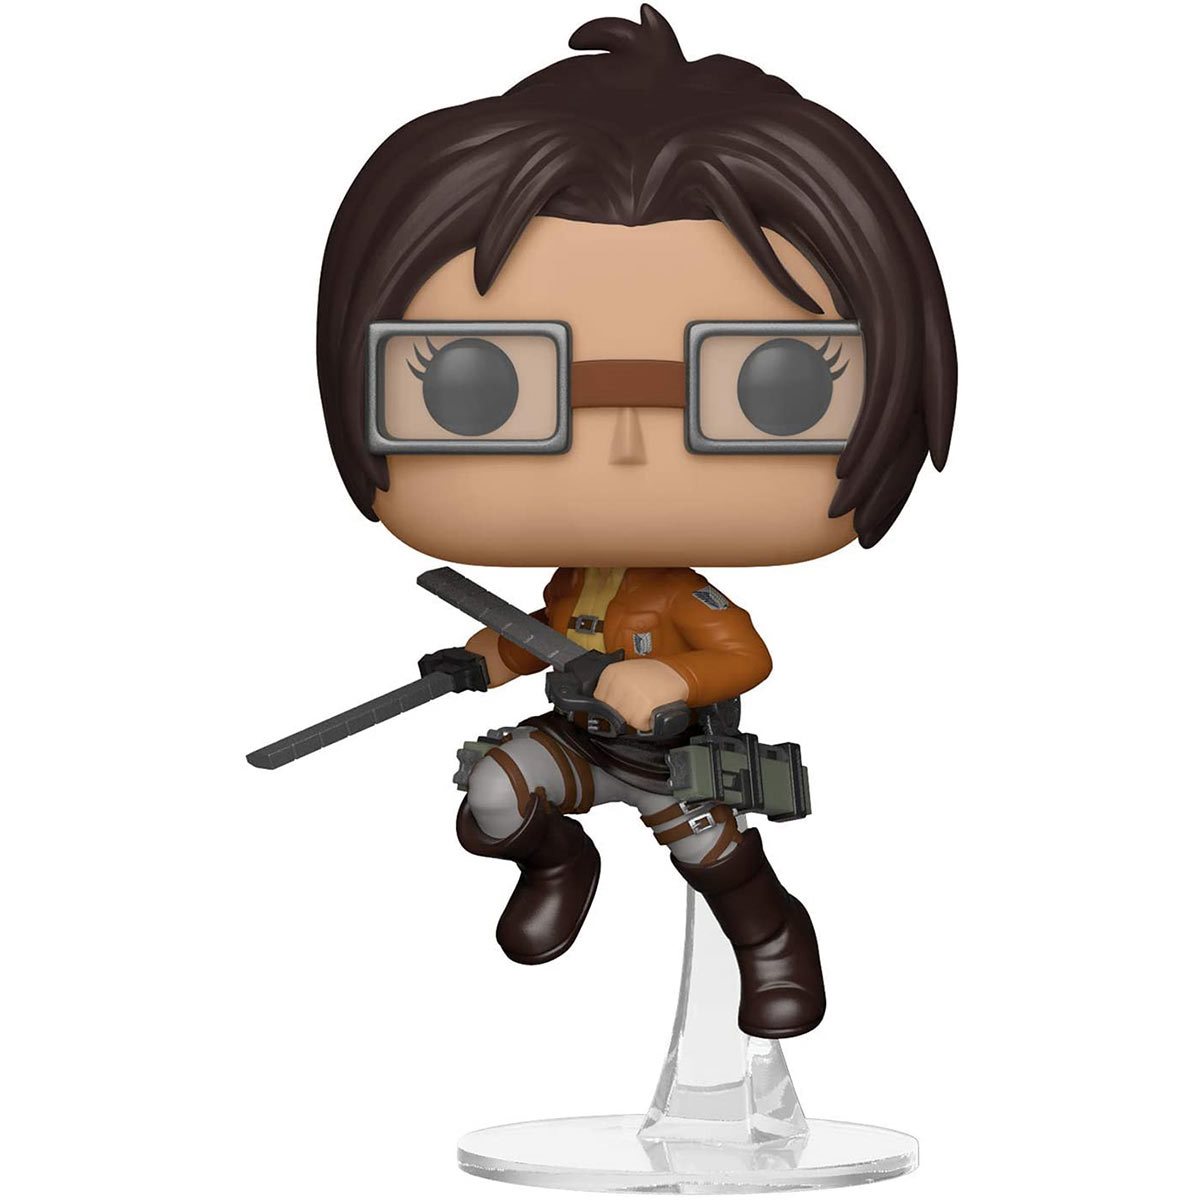 Everyday I wake up hoping for news about Attack on Titan Pops, Everyday im  disappointed. Anyone catching the EE restocks? : r/funkopop